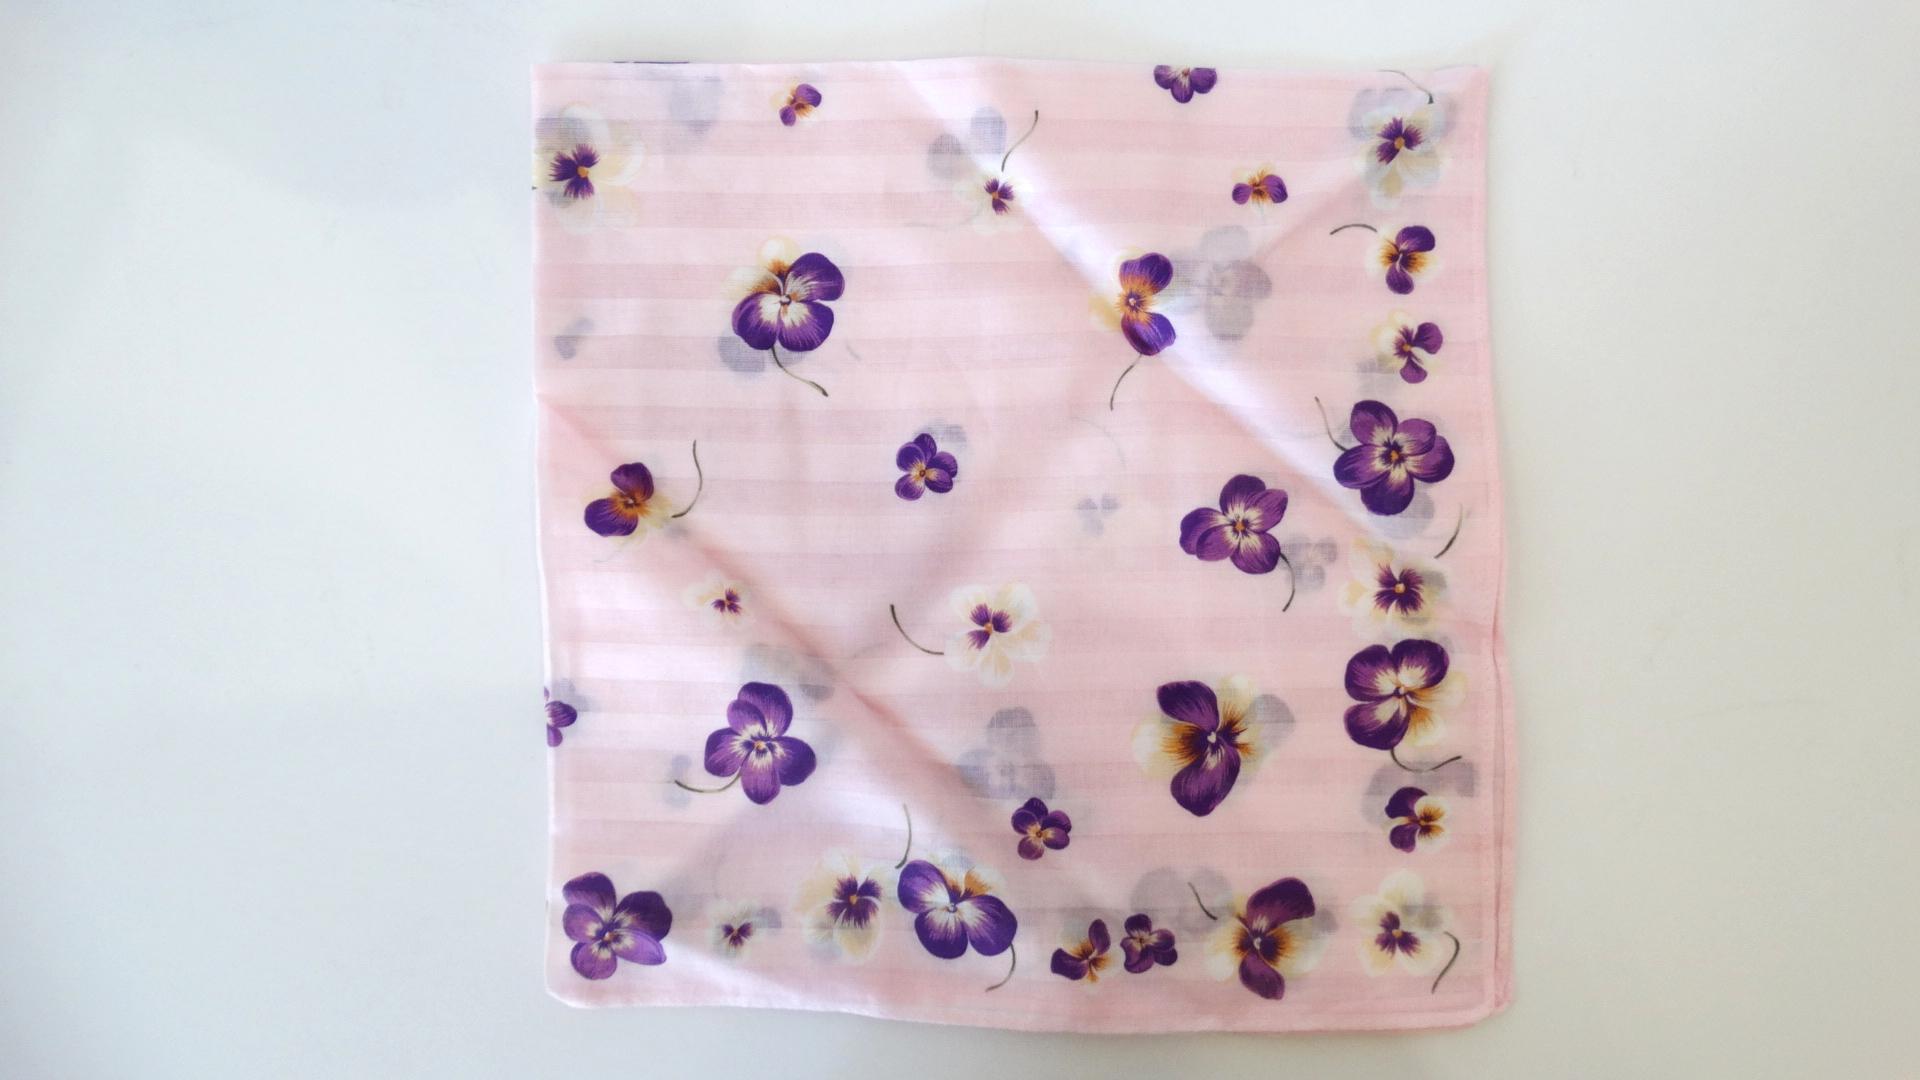 Precious floral printed handkerchief from designer Hanae Mori! Pale pink background with violet, white and yellow pansy flowers printed all over. 